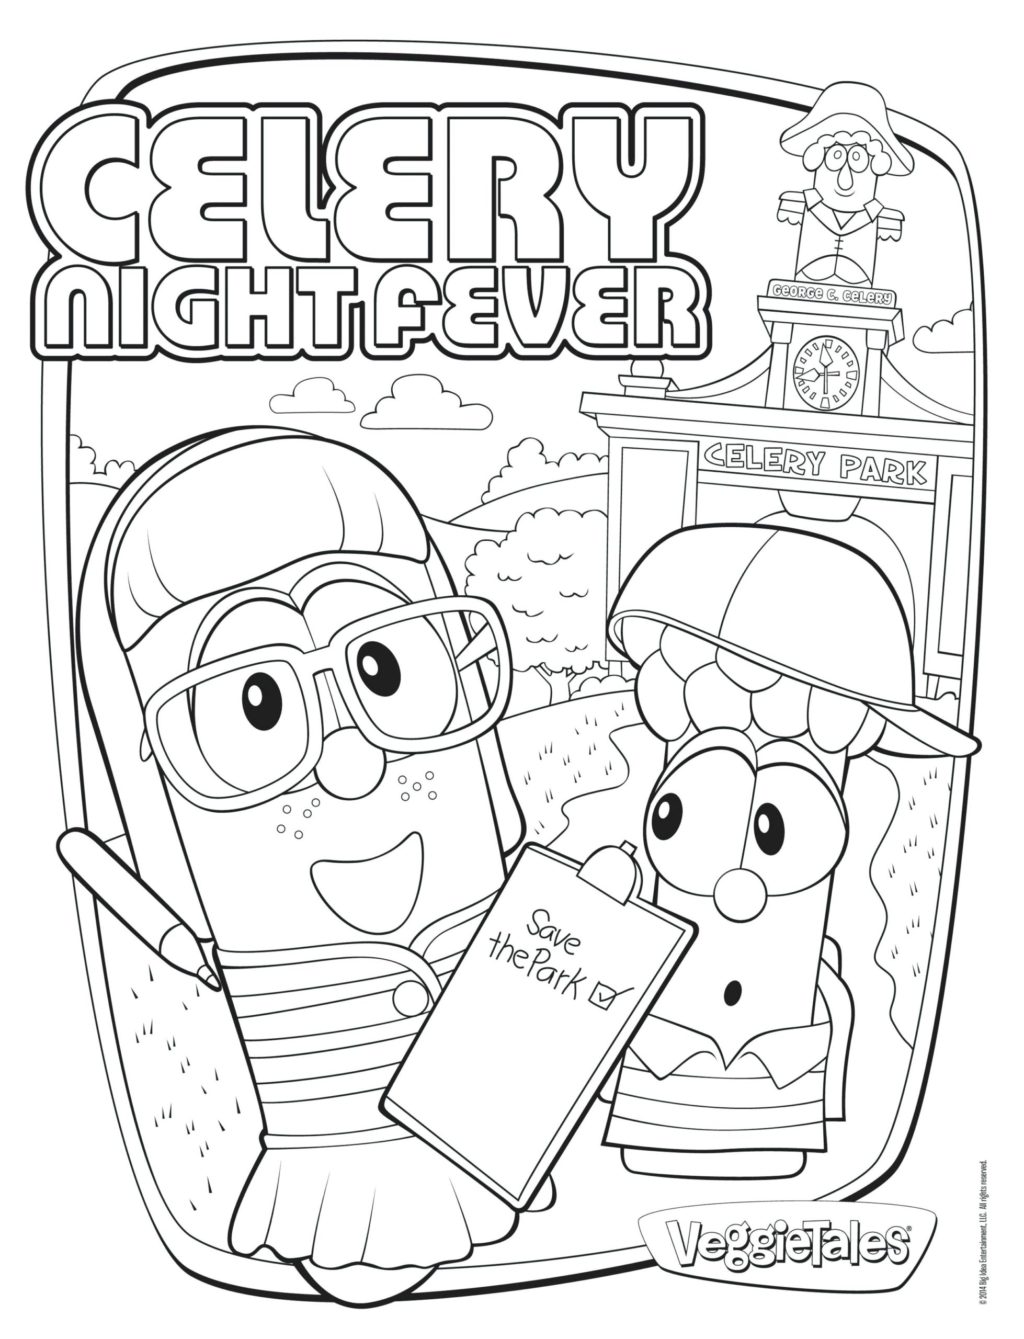 worksheet ~ Worksheet Christmas Math Coloring Sheets Printabler Adults Kids  Mickey Mouse Pages 45 Fantastic Christmas Math Coloring Sheets. Christmas  Math Coloring Sheets 2nd Grade. Free Christmas Math Coloring Sheets 4th  Grade